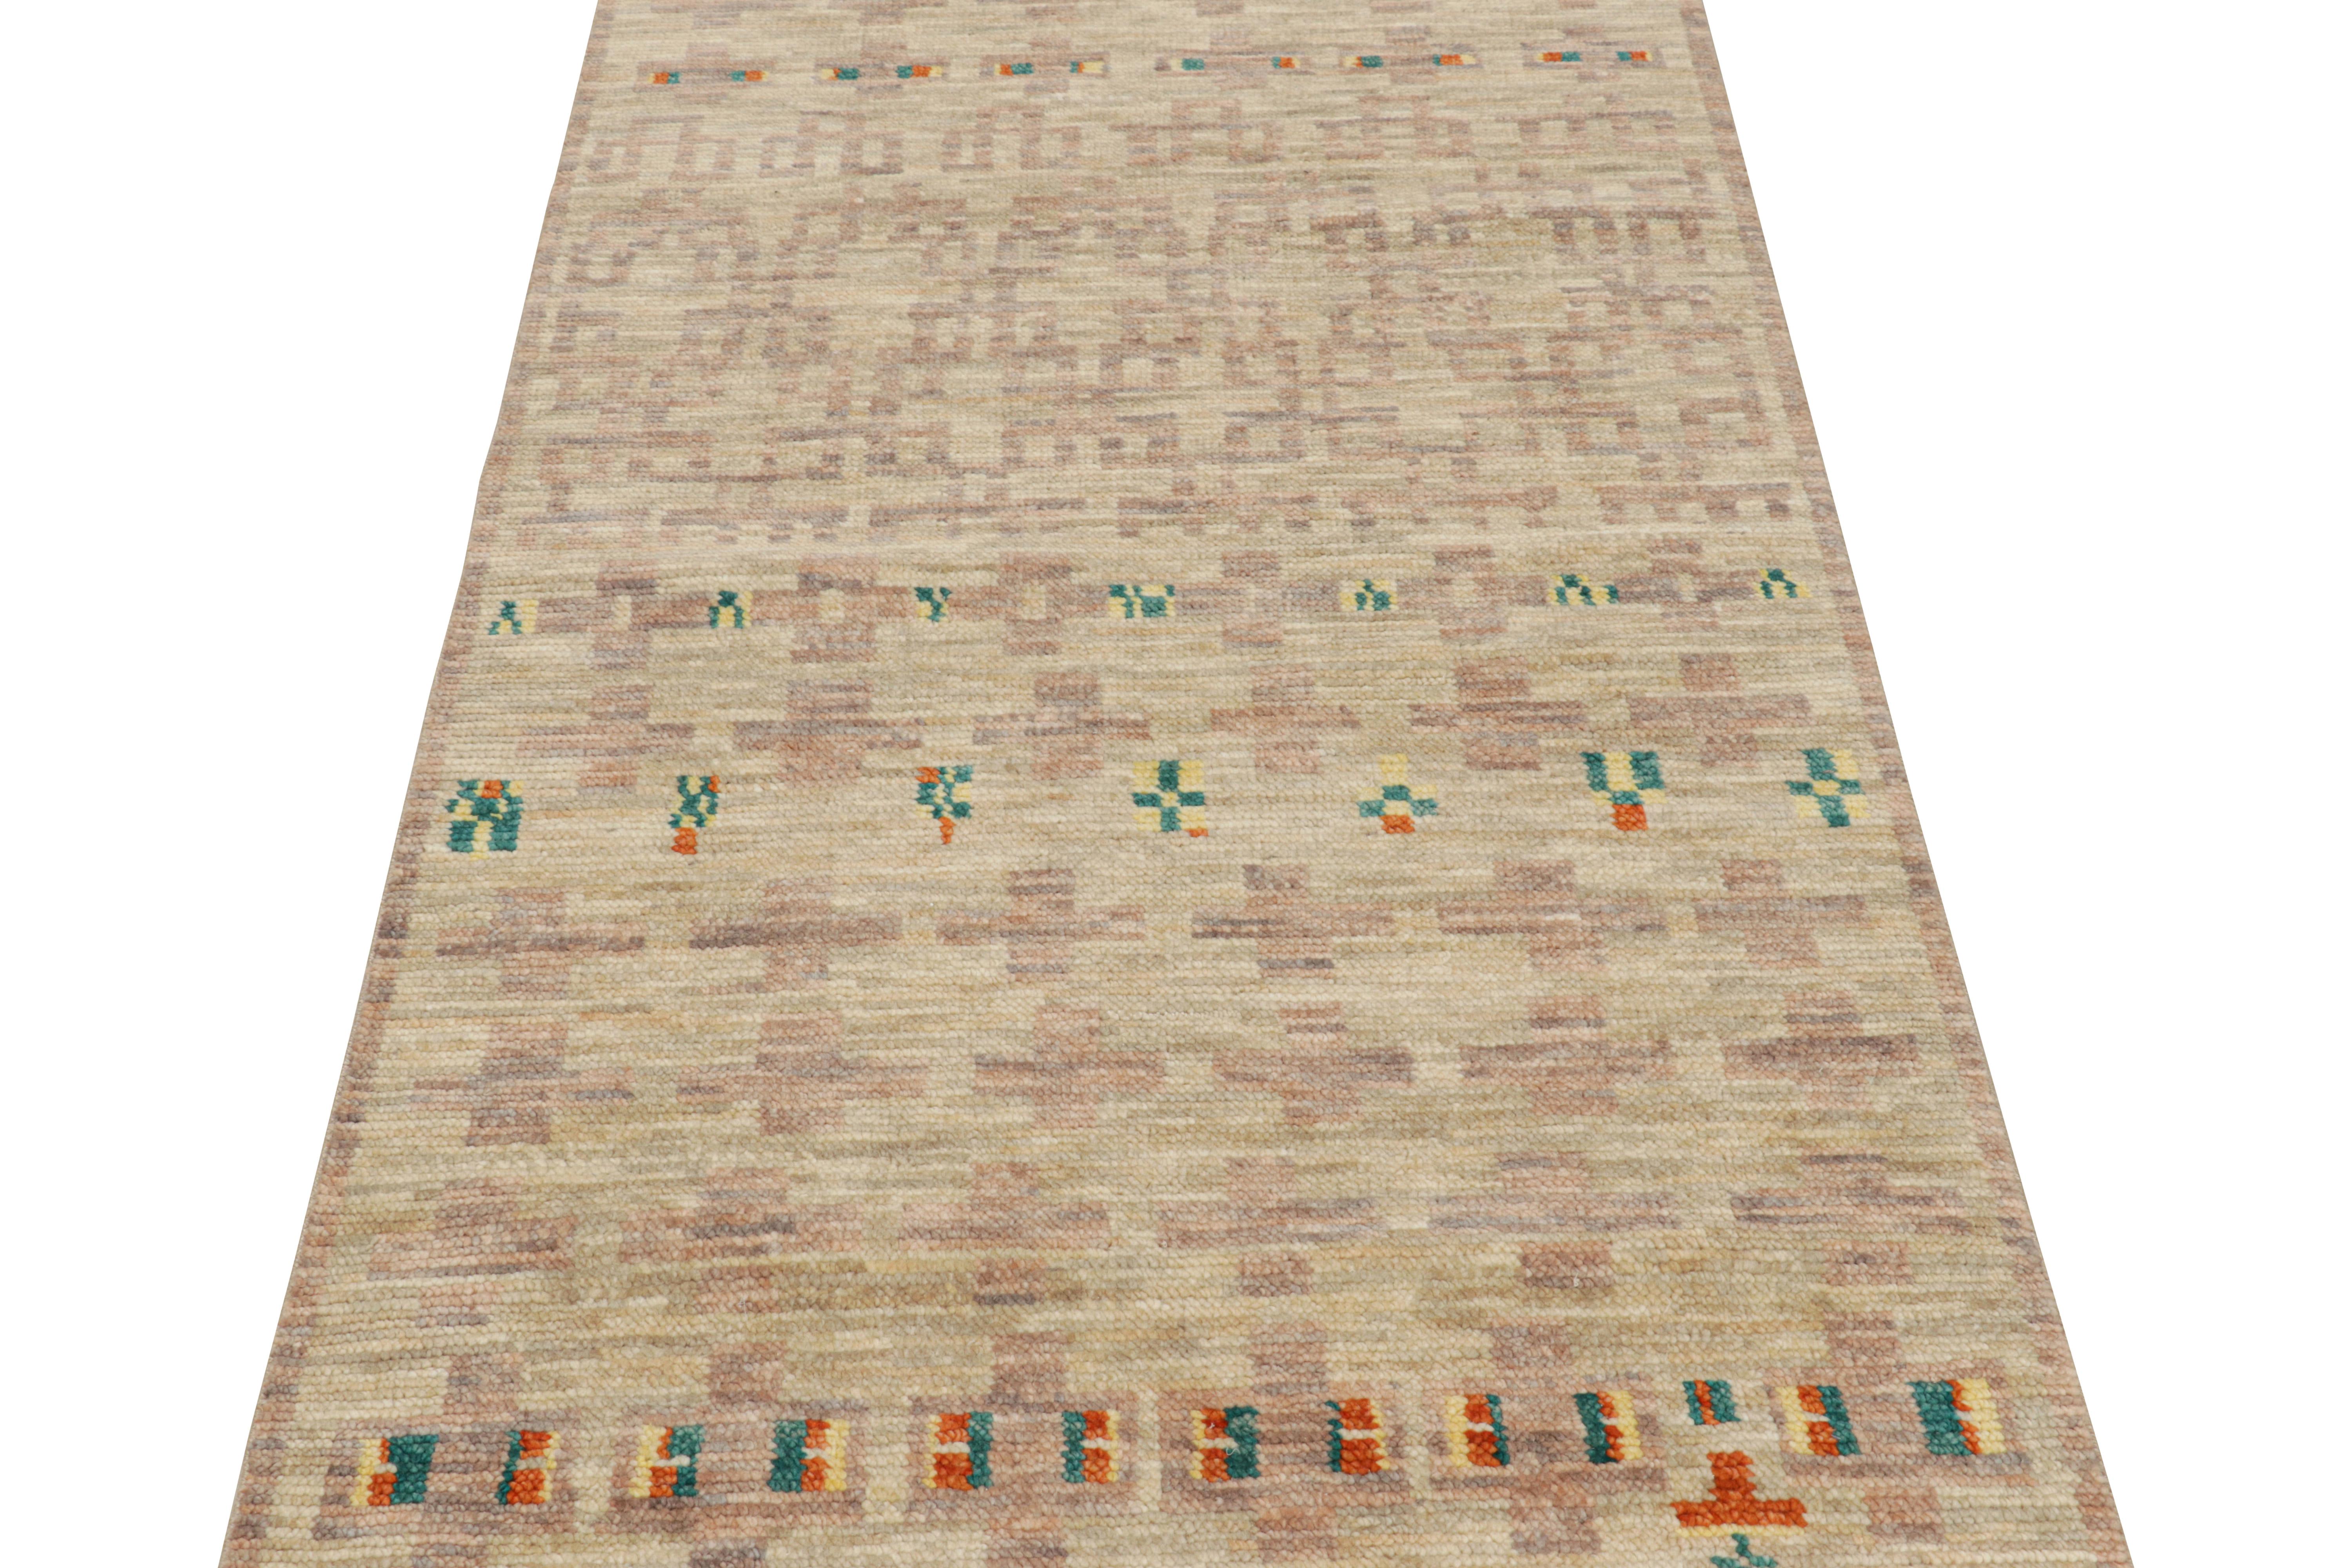 Hand-knotted in wool, this 3x12 contemporary Moroccan style rug features a ribbed texture and geometric patterns inspired by the primitivist Berber weaving traditions. 

On the Design: 

Connoisseurs may admire the warm, graphic appeal of the rug